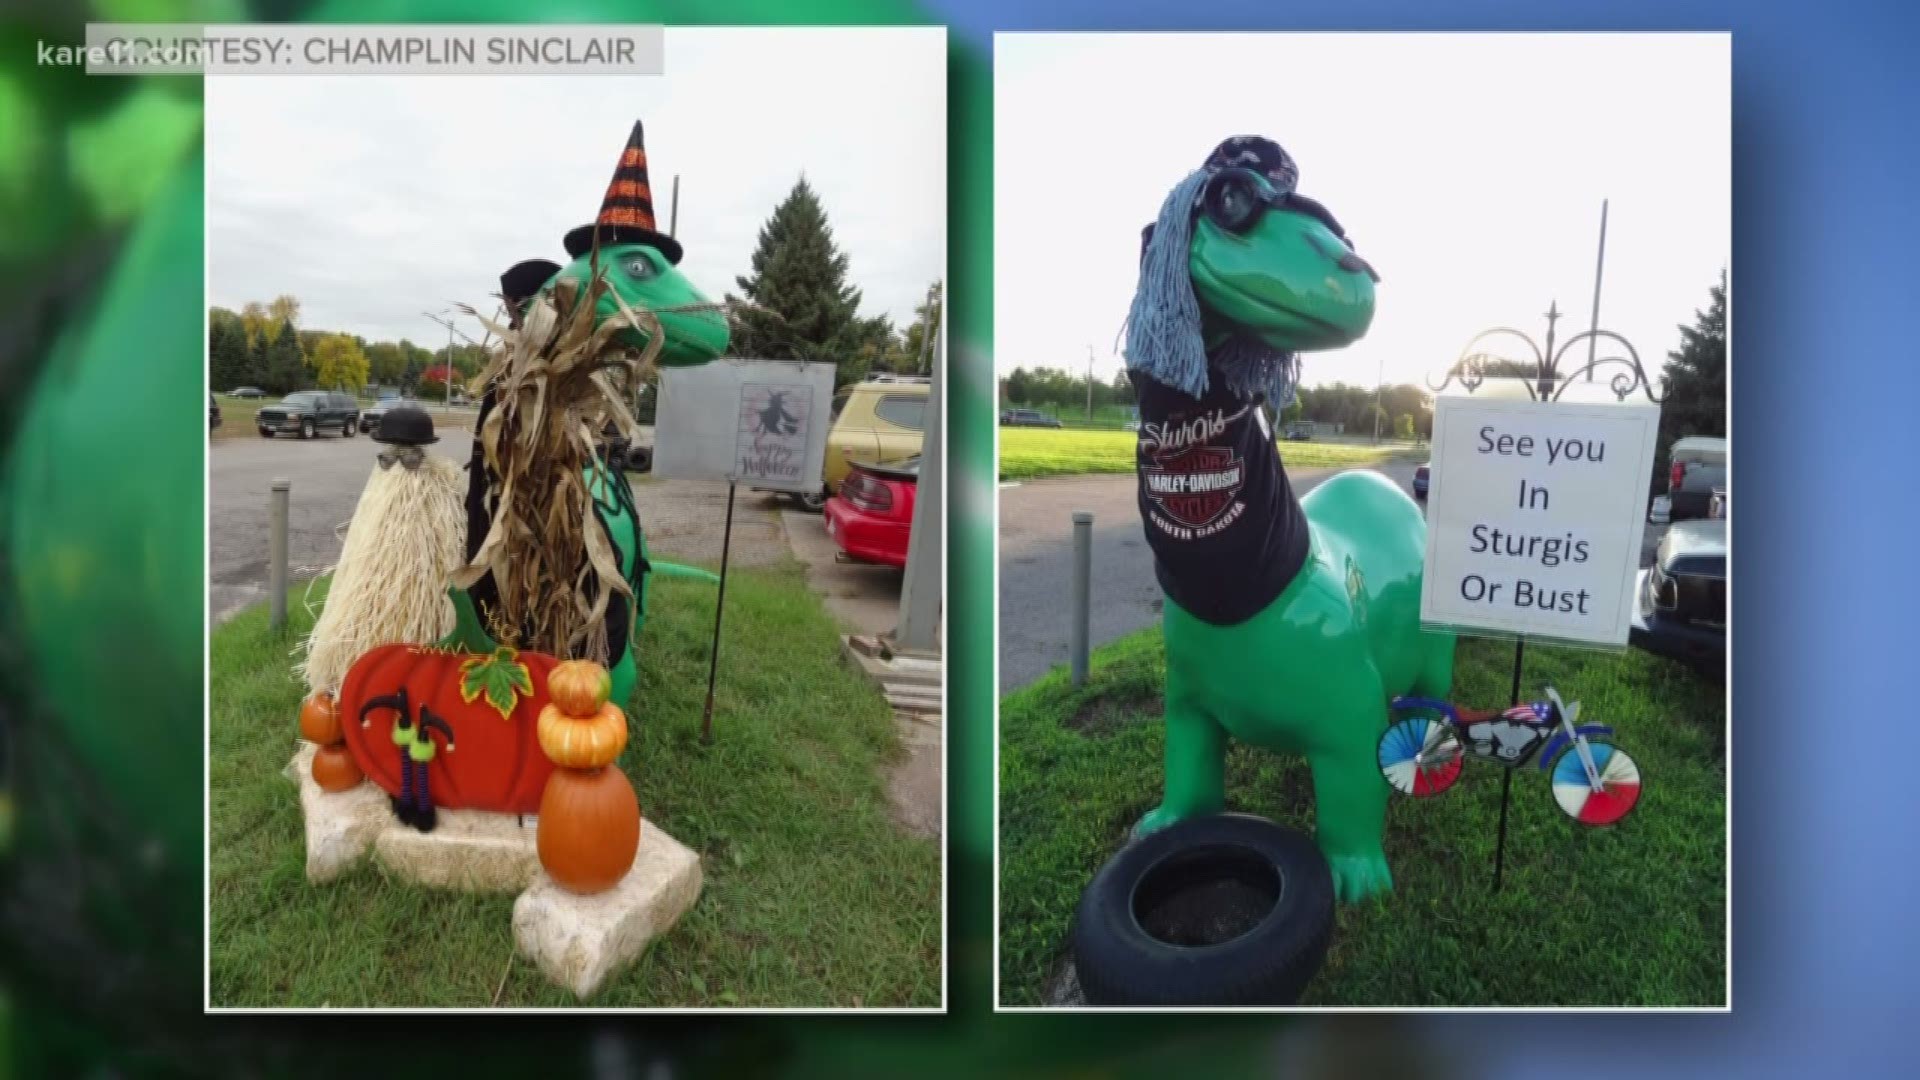 About 10 years ago, Diana Merkl started dressing up the Sinclair dinosaur outside her work.